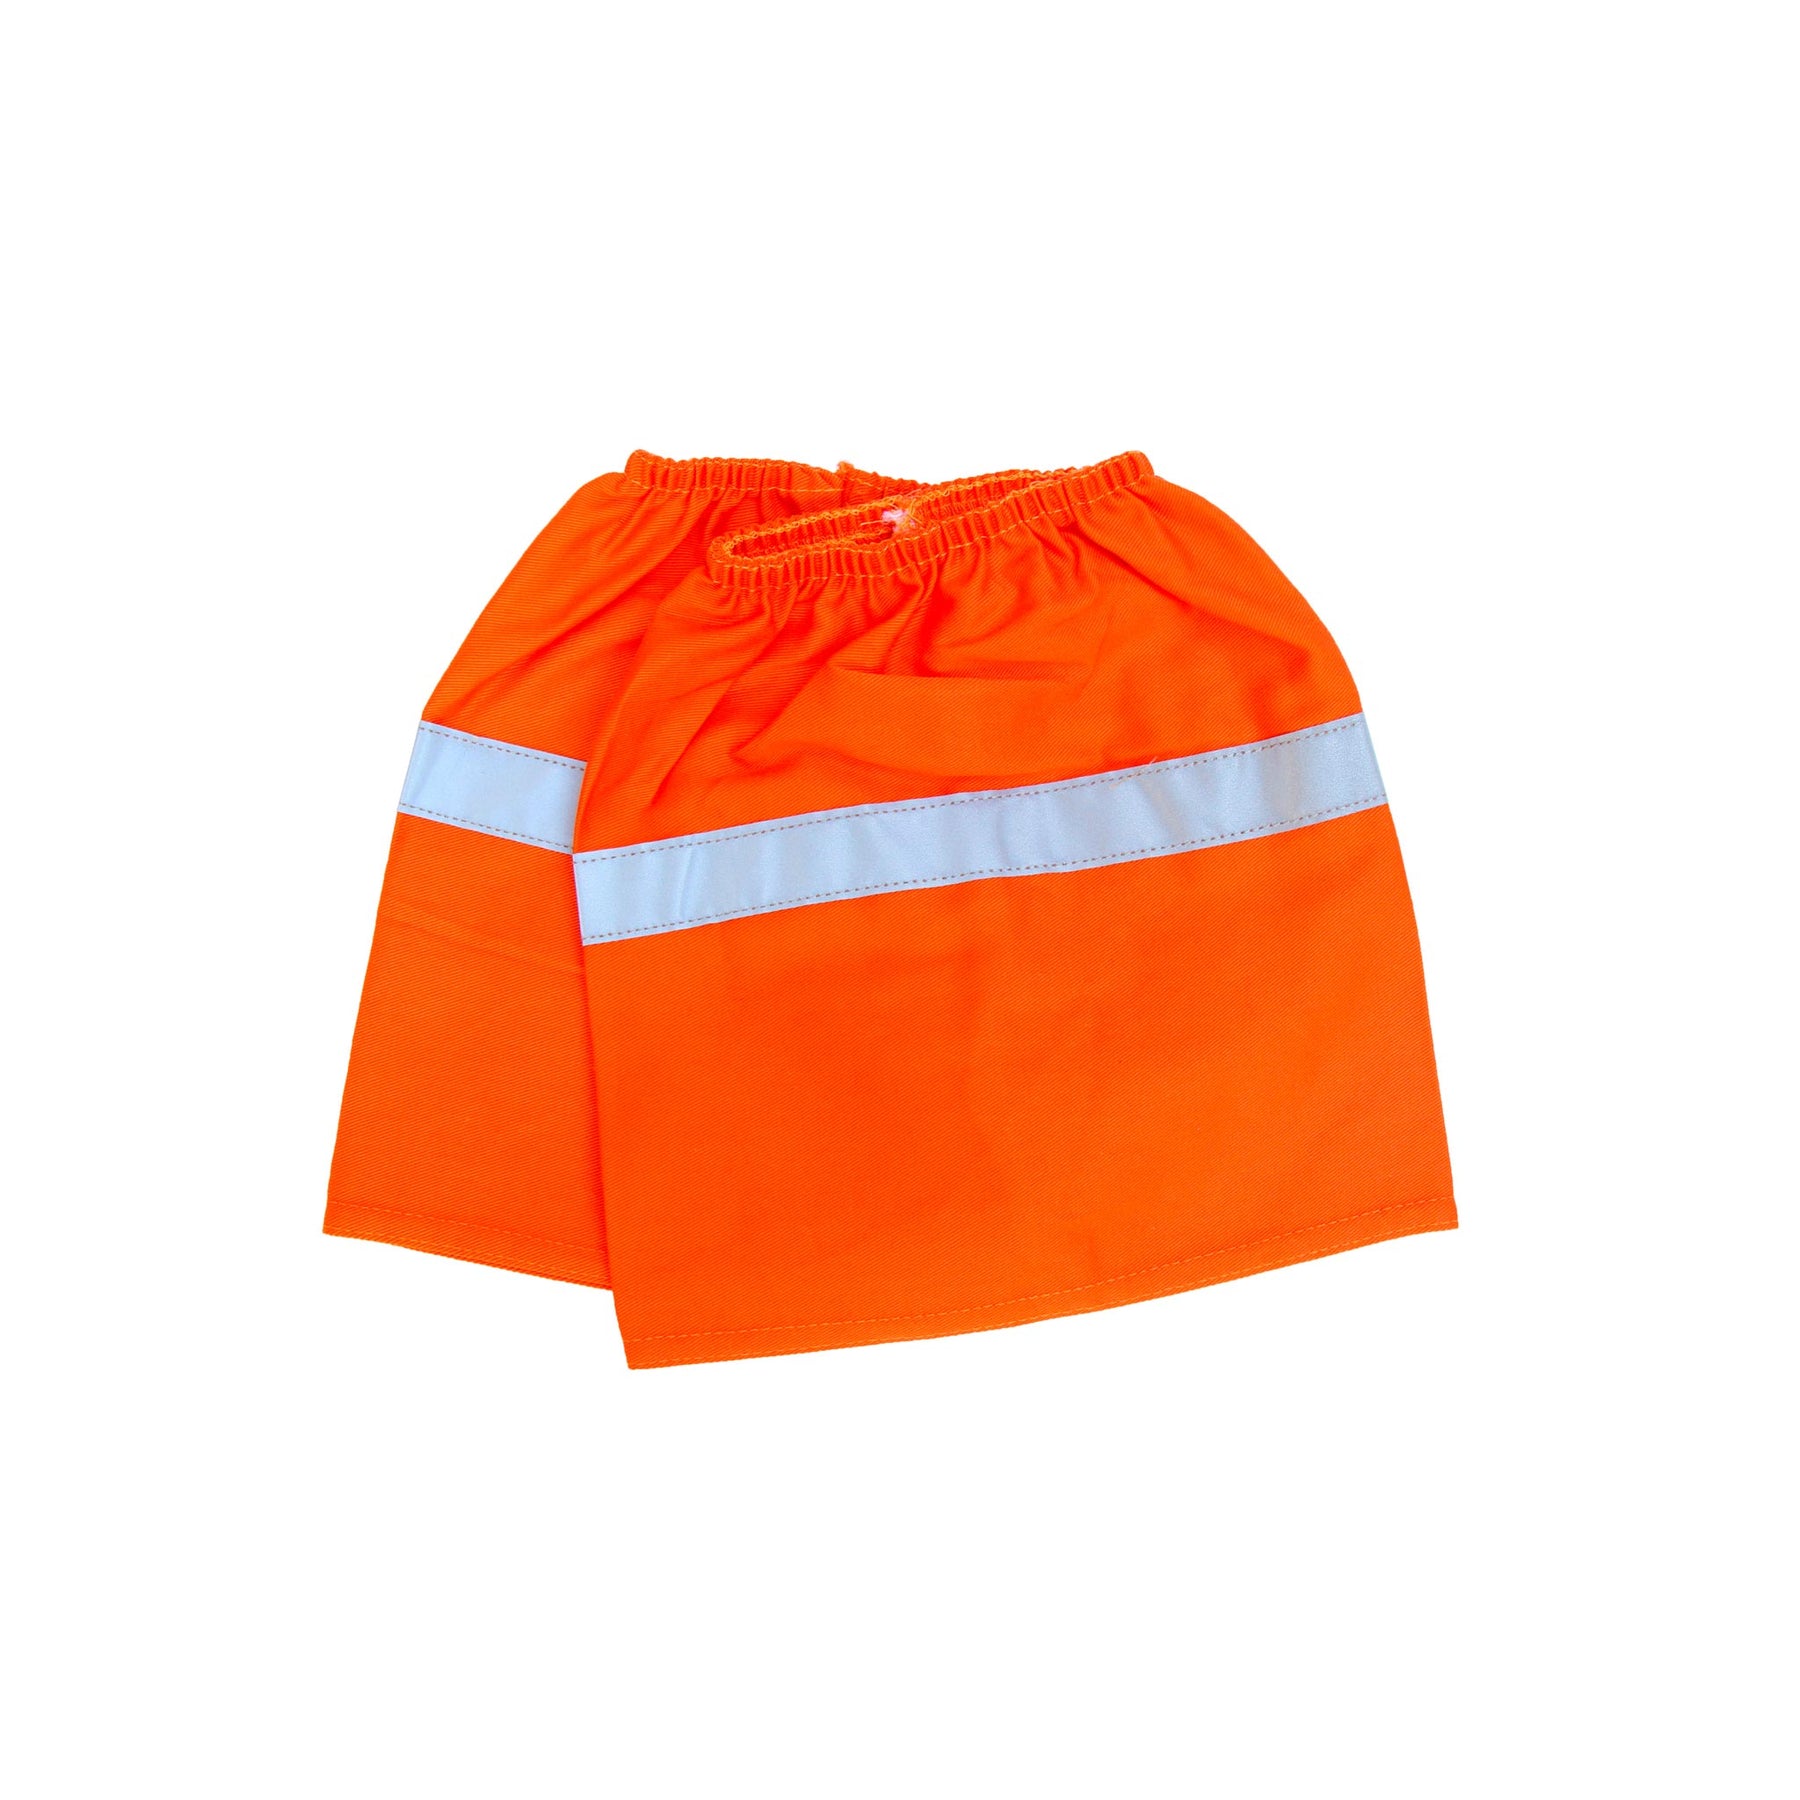 hi vis orange boot covers with reflective tape